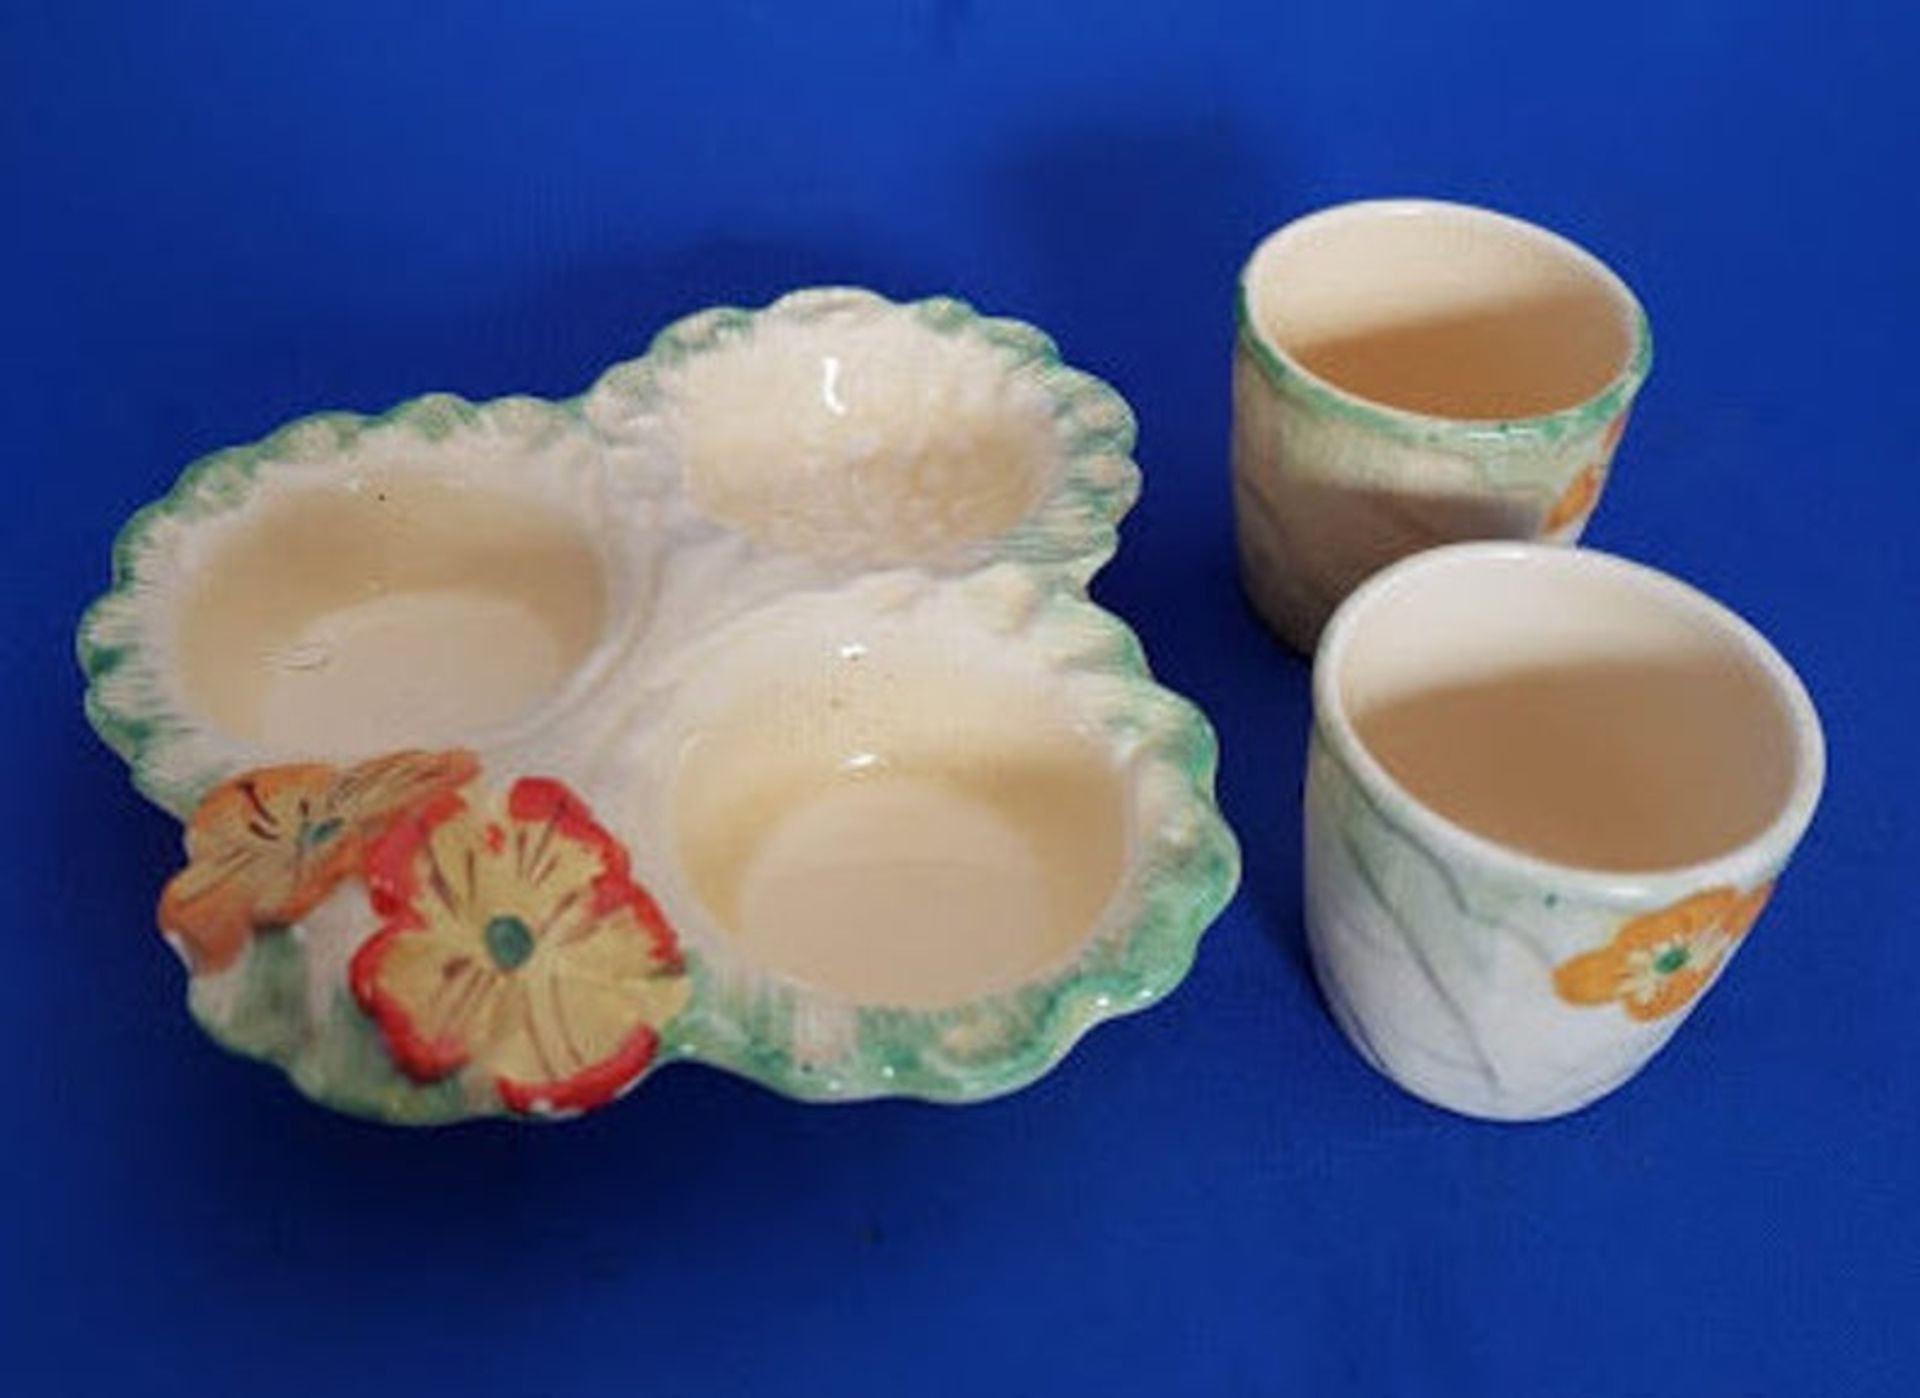 Kensington Ware Pottery Egg Cup Tray c1920 1930 Primula pattern - Image 2 of 4